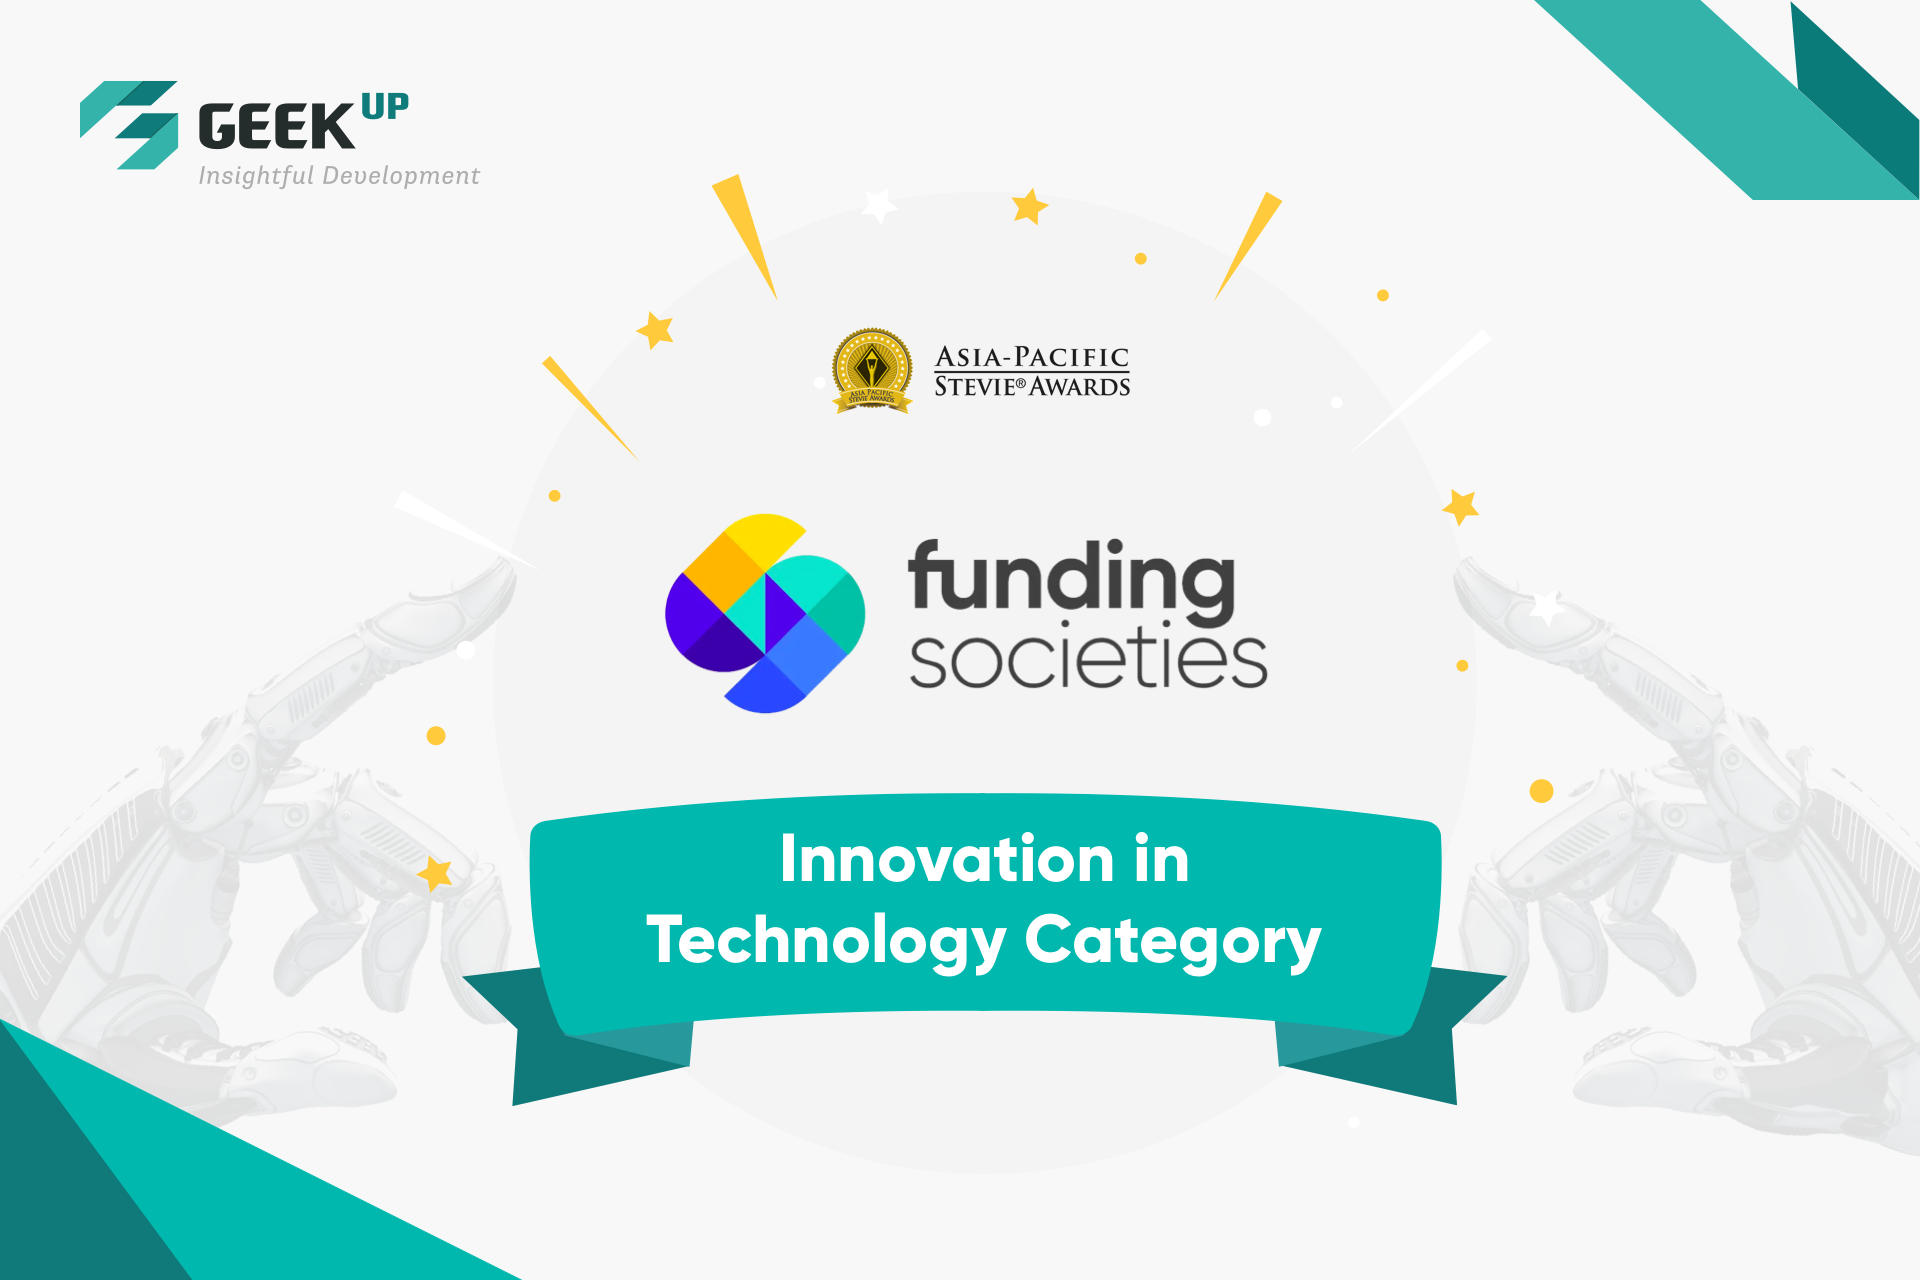 Funding Societies Named Winner Of a Silver Stevie Award in Innovation in Technology Category at the Asia-Pacfic Stevie Awards